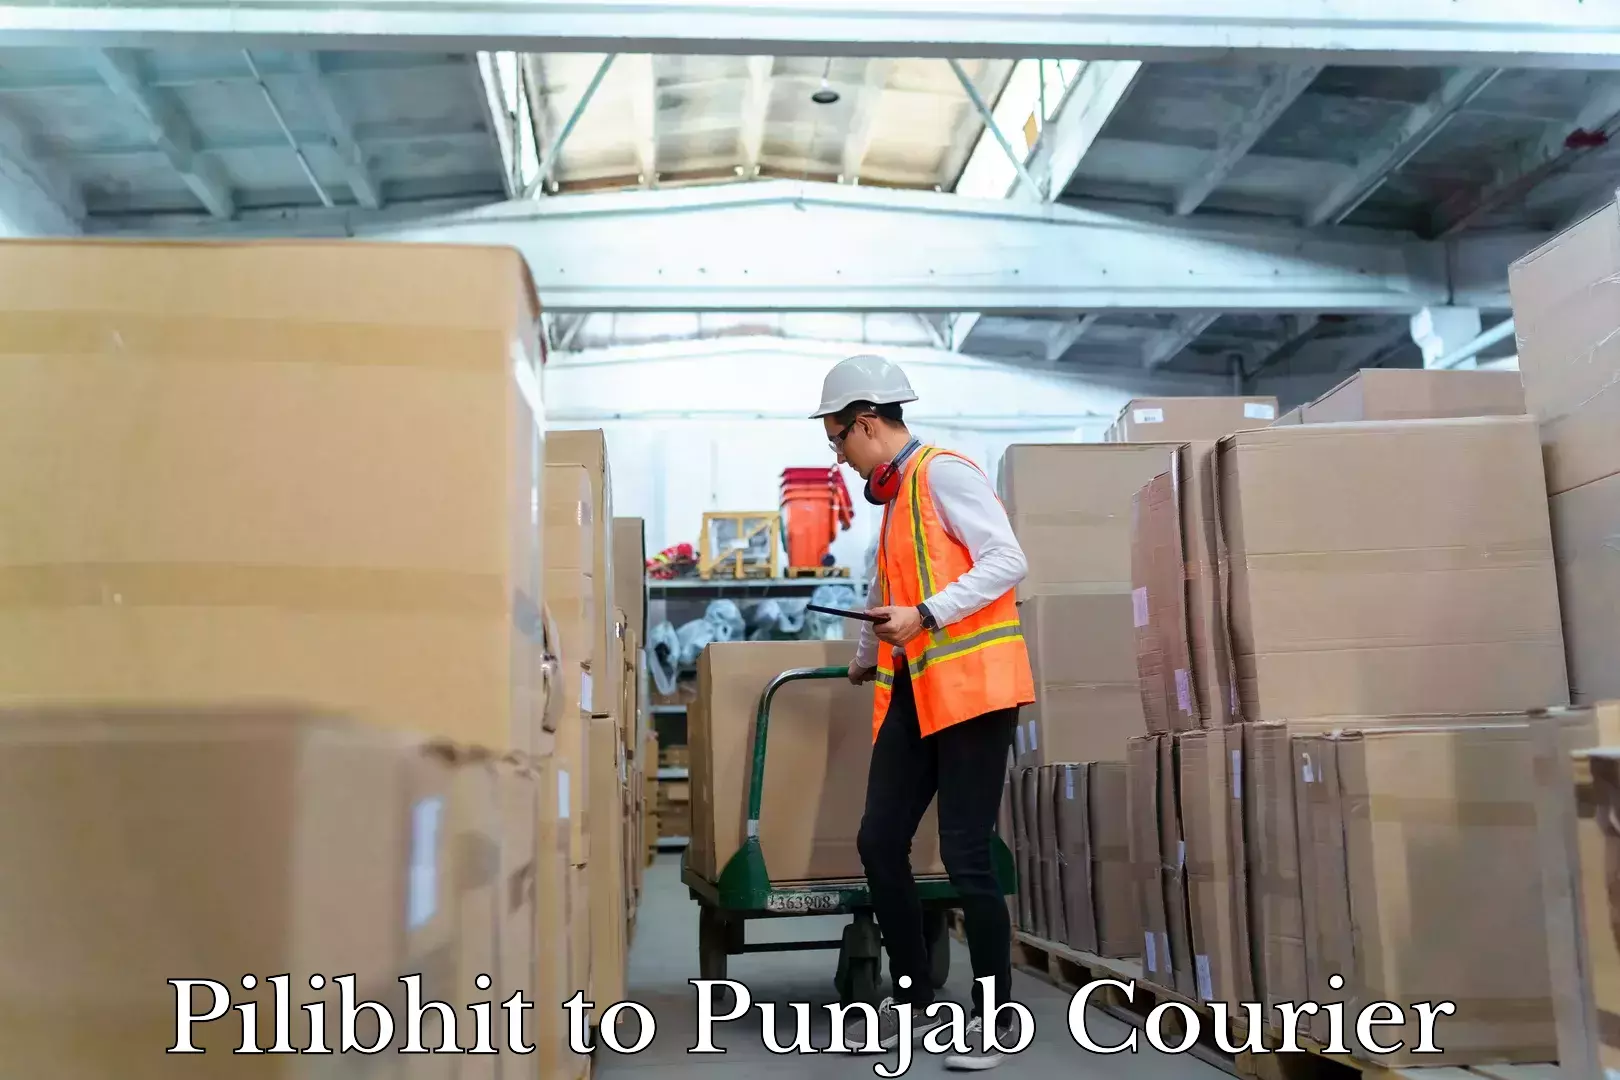 Subscription-based courier Pilibhit to Punjab